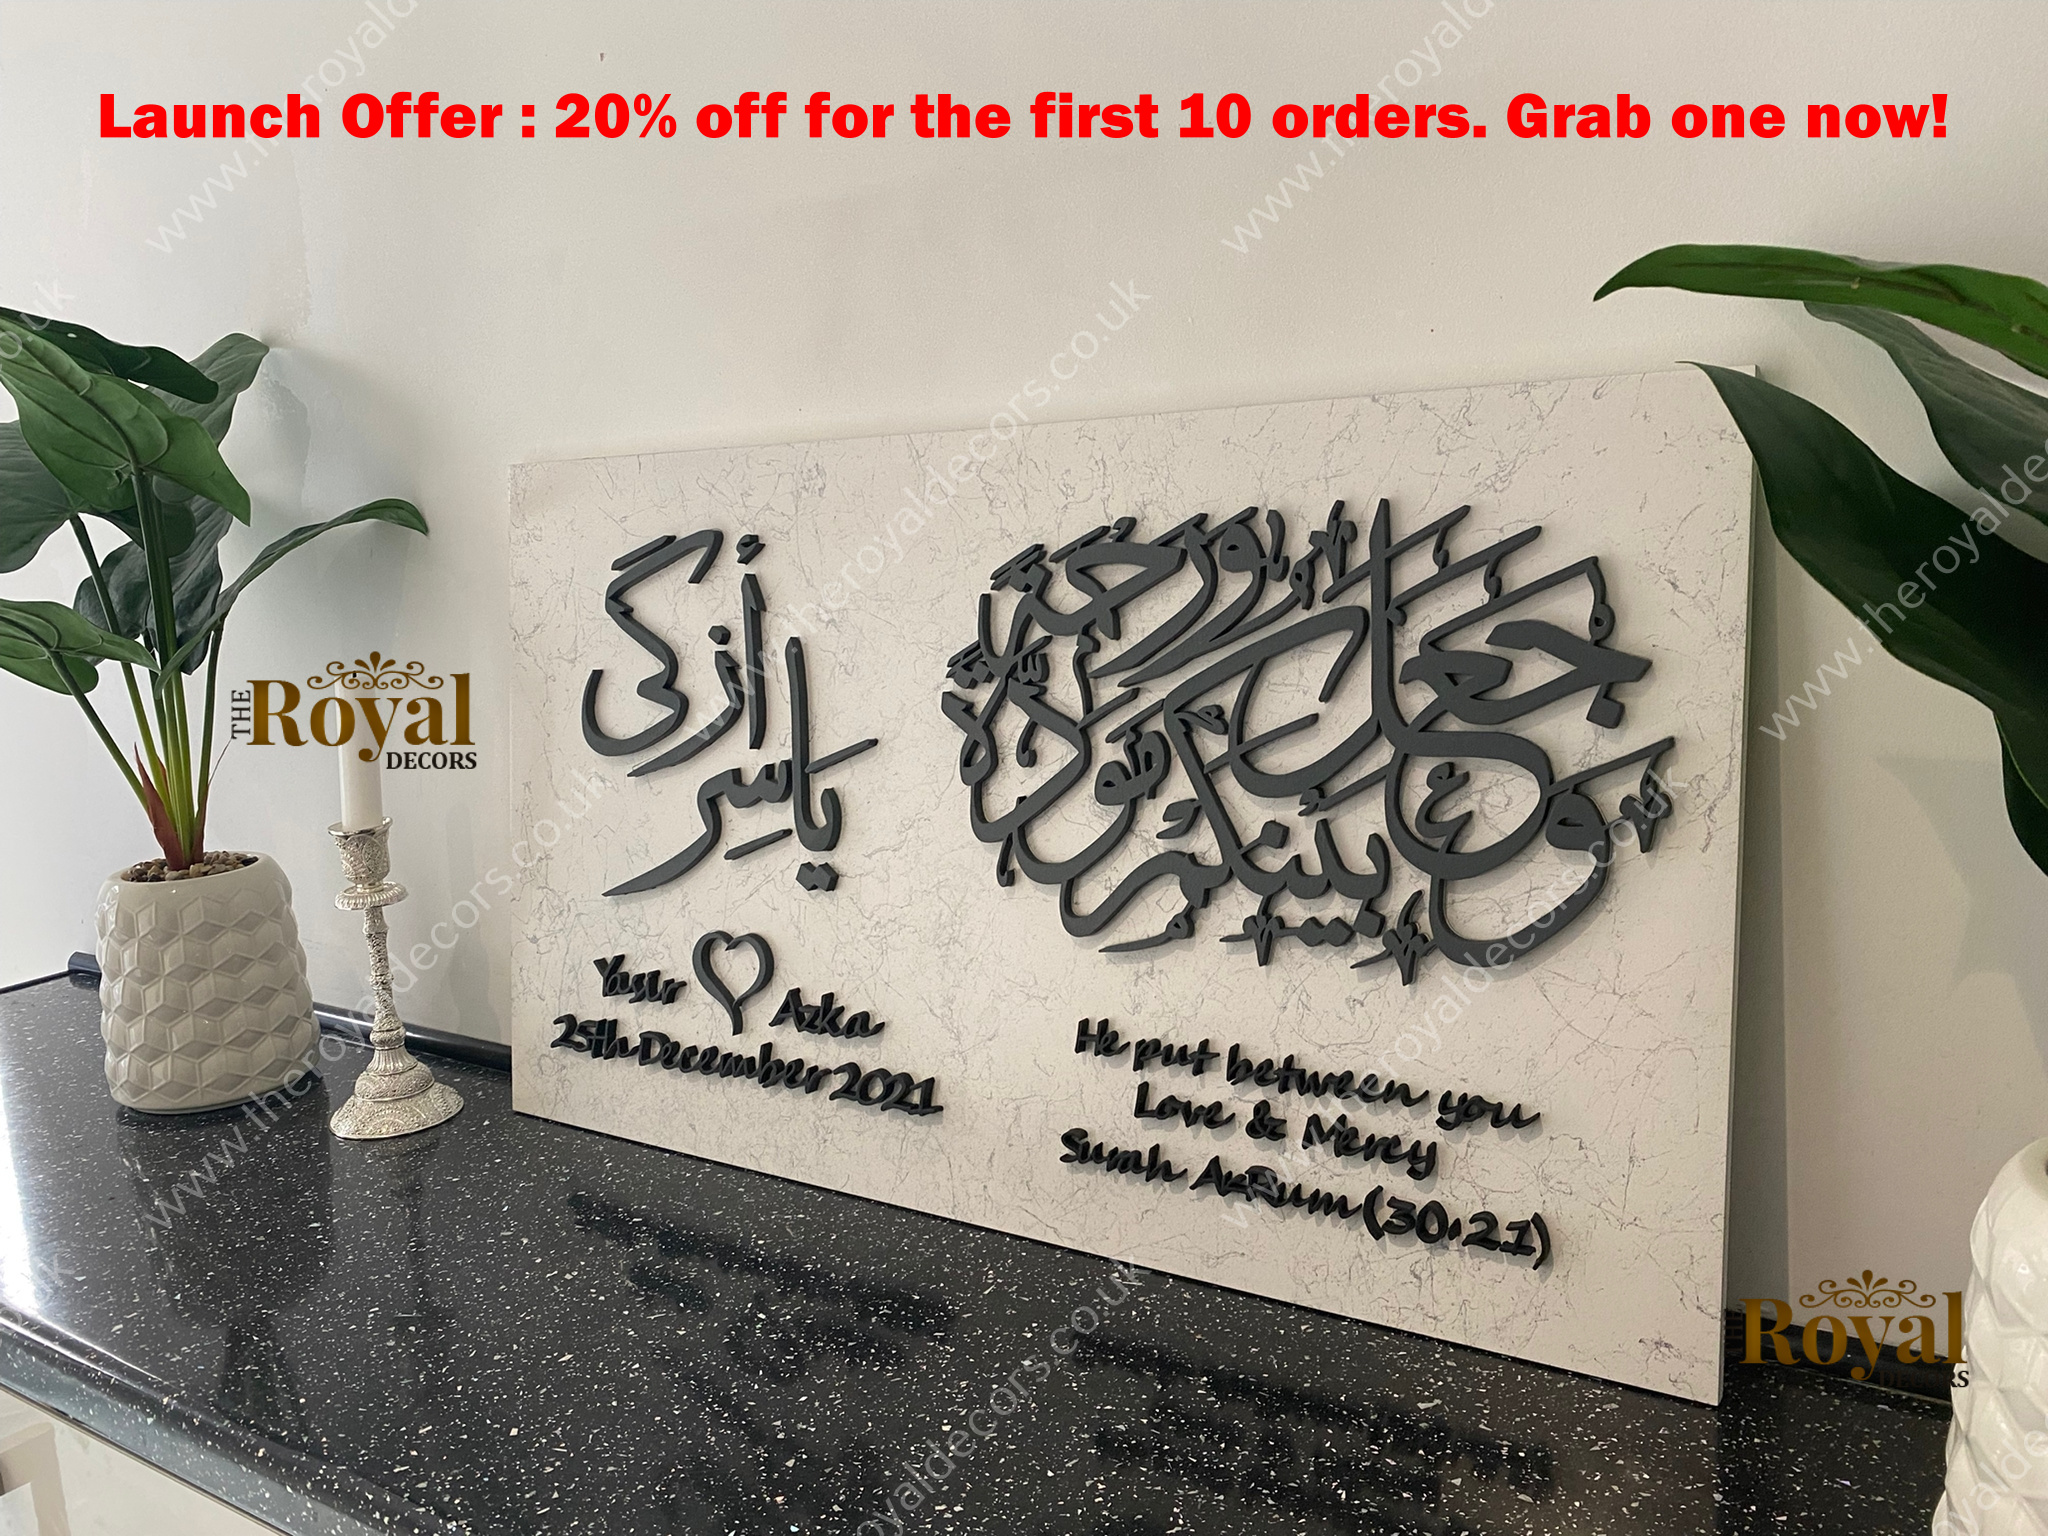 He put between you love and mercy, personalised muslim couple wedding anniversary gift, muslim wedding entrance sign decor, couple arabic names